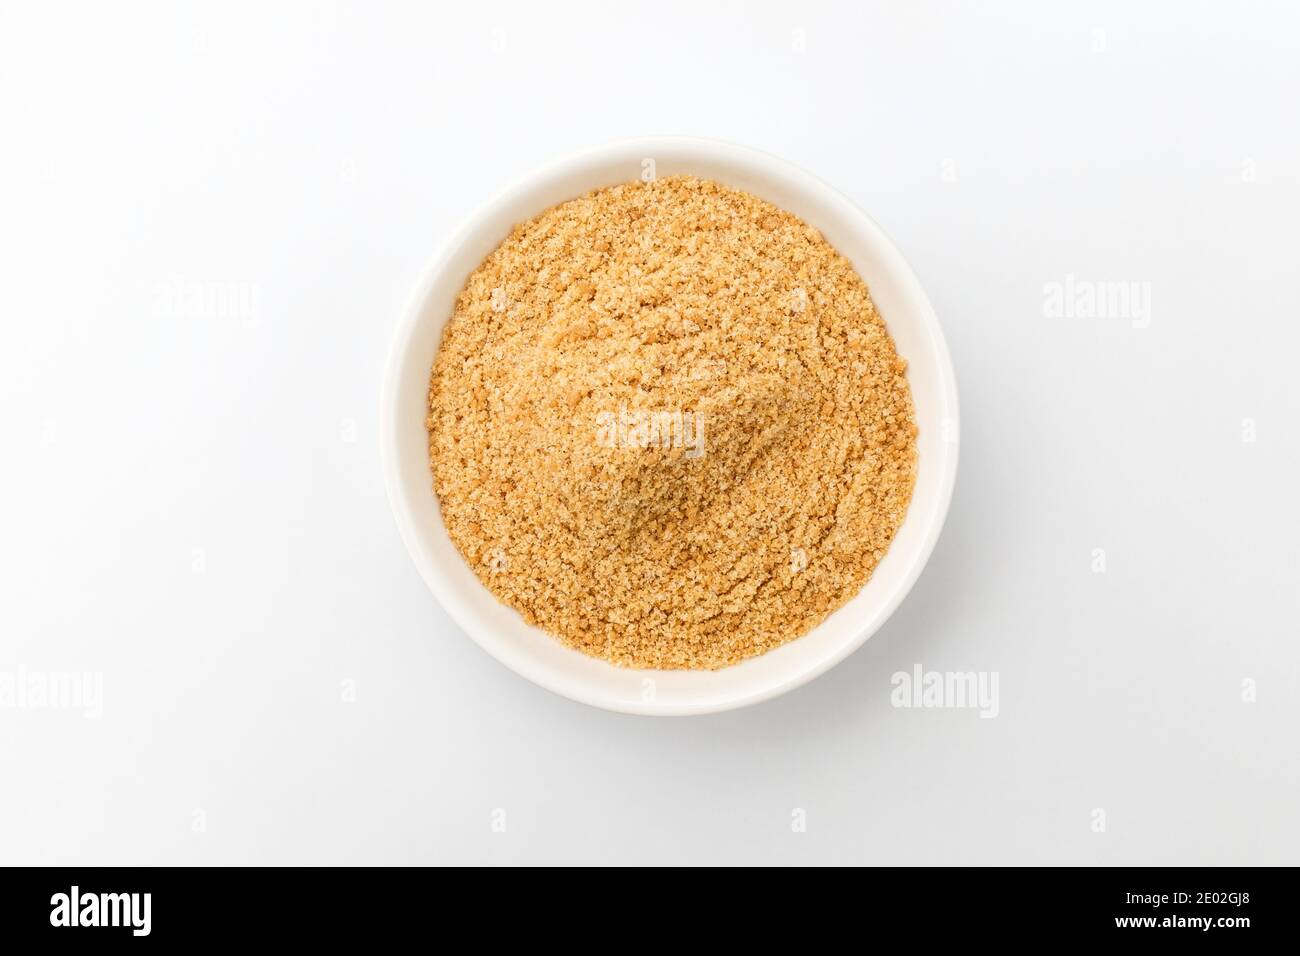 Meat flavored food additives. Powder that enhances the flavor. Seasoning with meat flavor Stock Photo